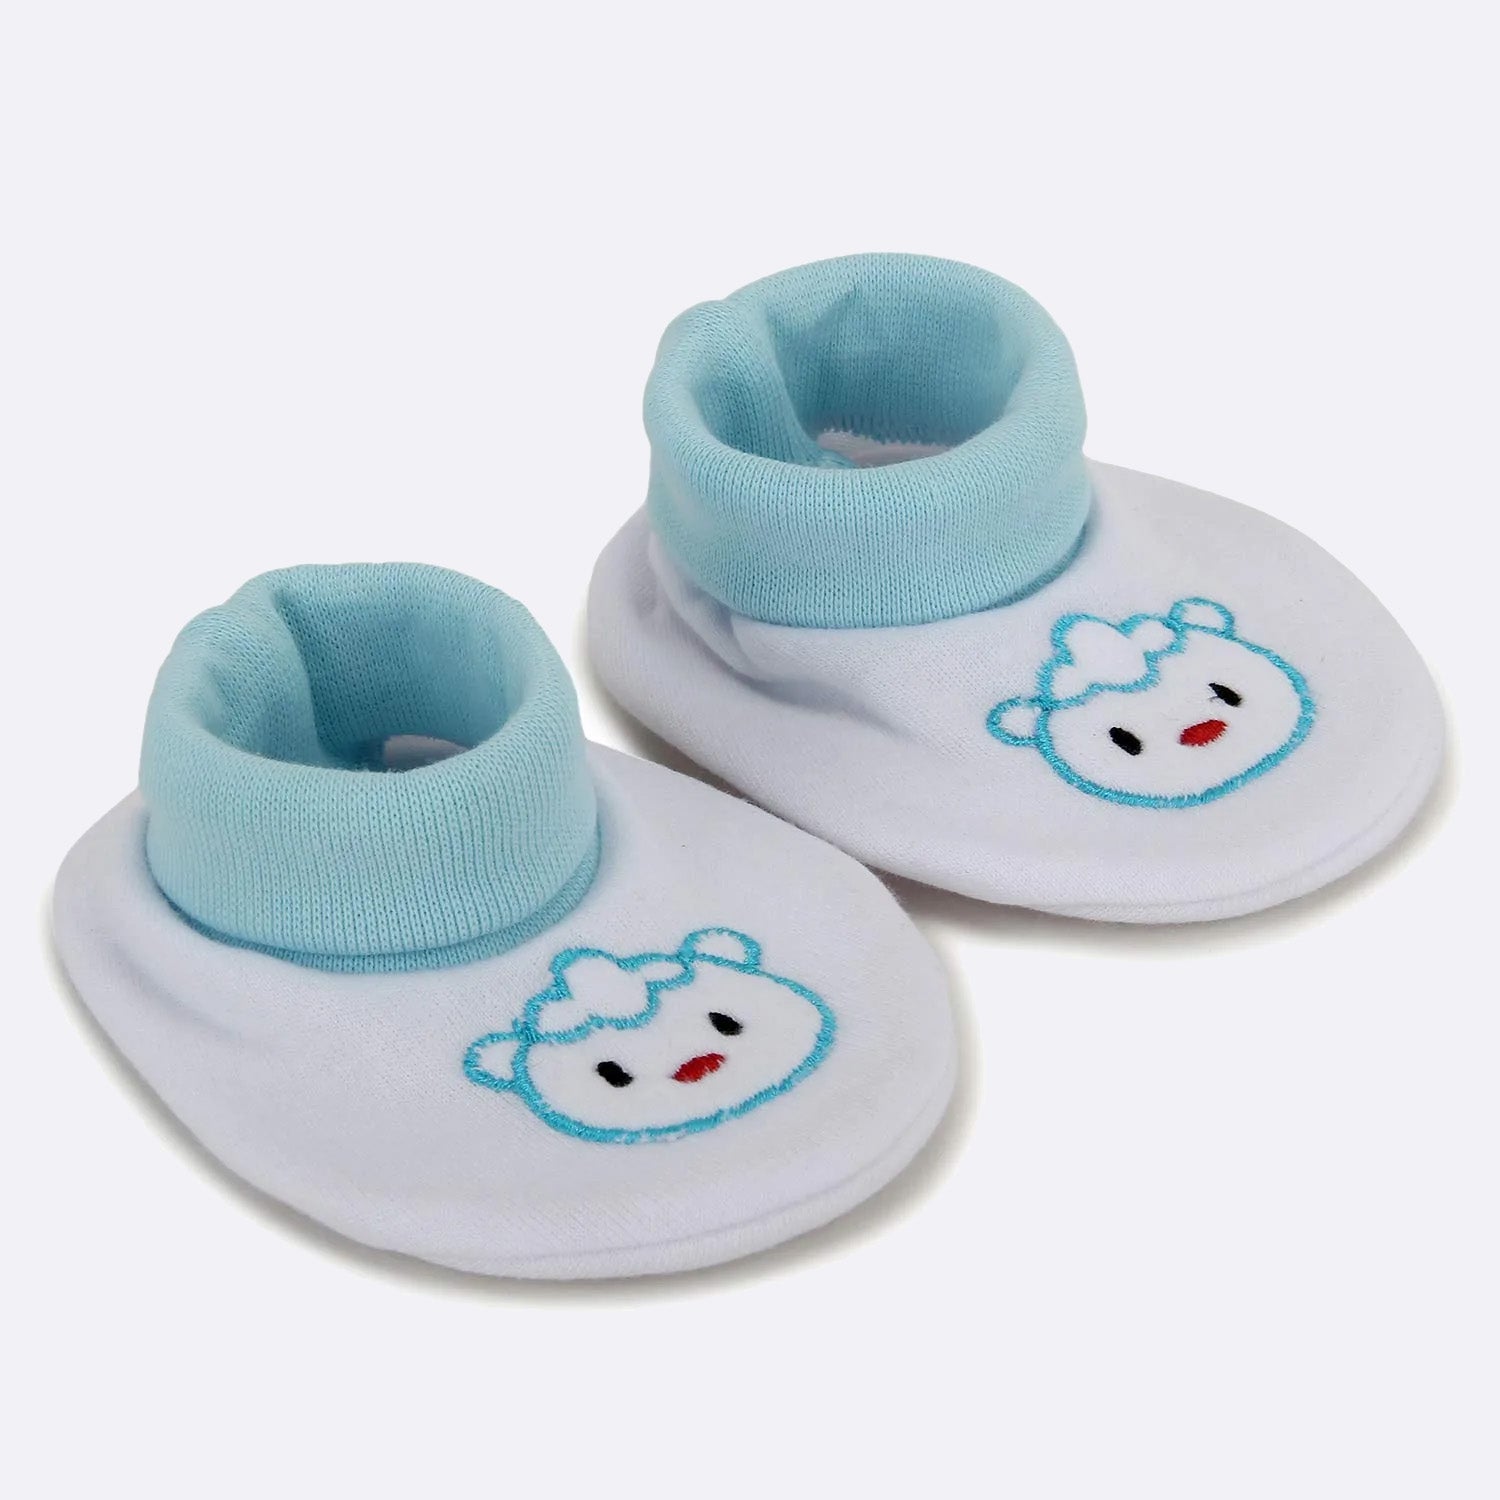 Teddy Cotton Mittens and Booties (White, Pack of 1)